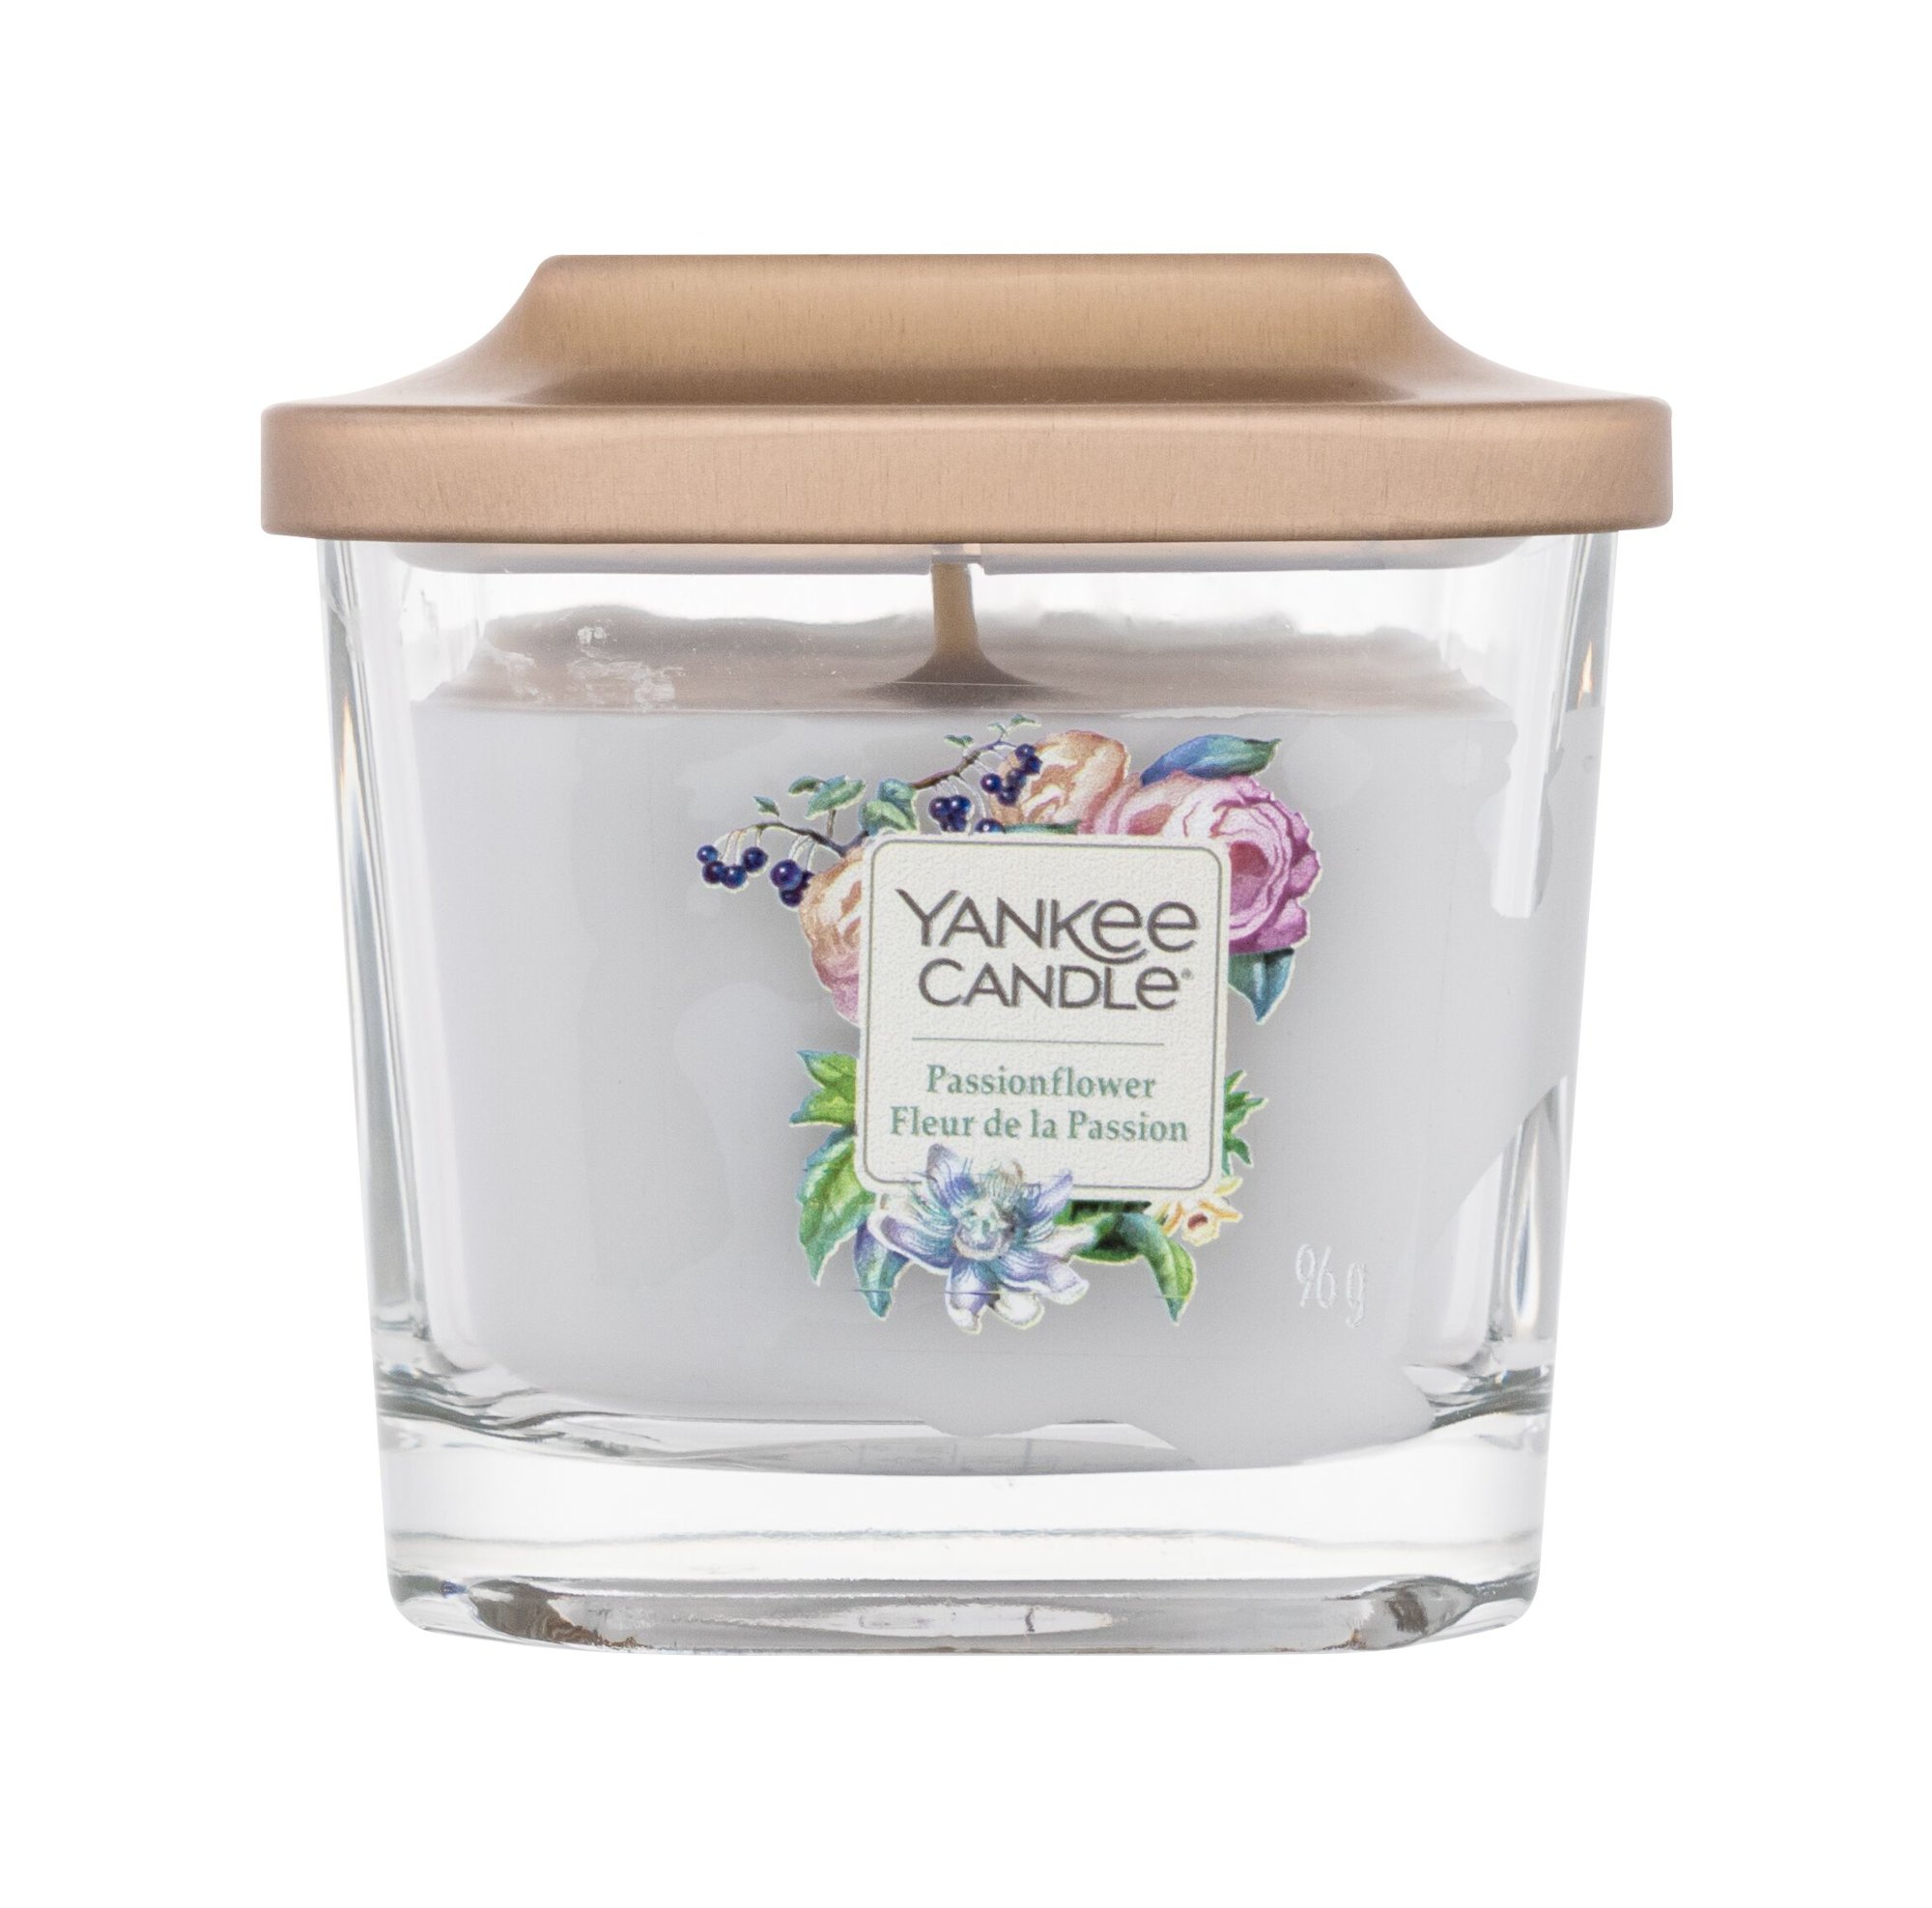 Yankee Candle Elevation Collection Passionflower 96g Kvepalai Unisex Scented Candle